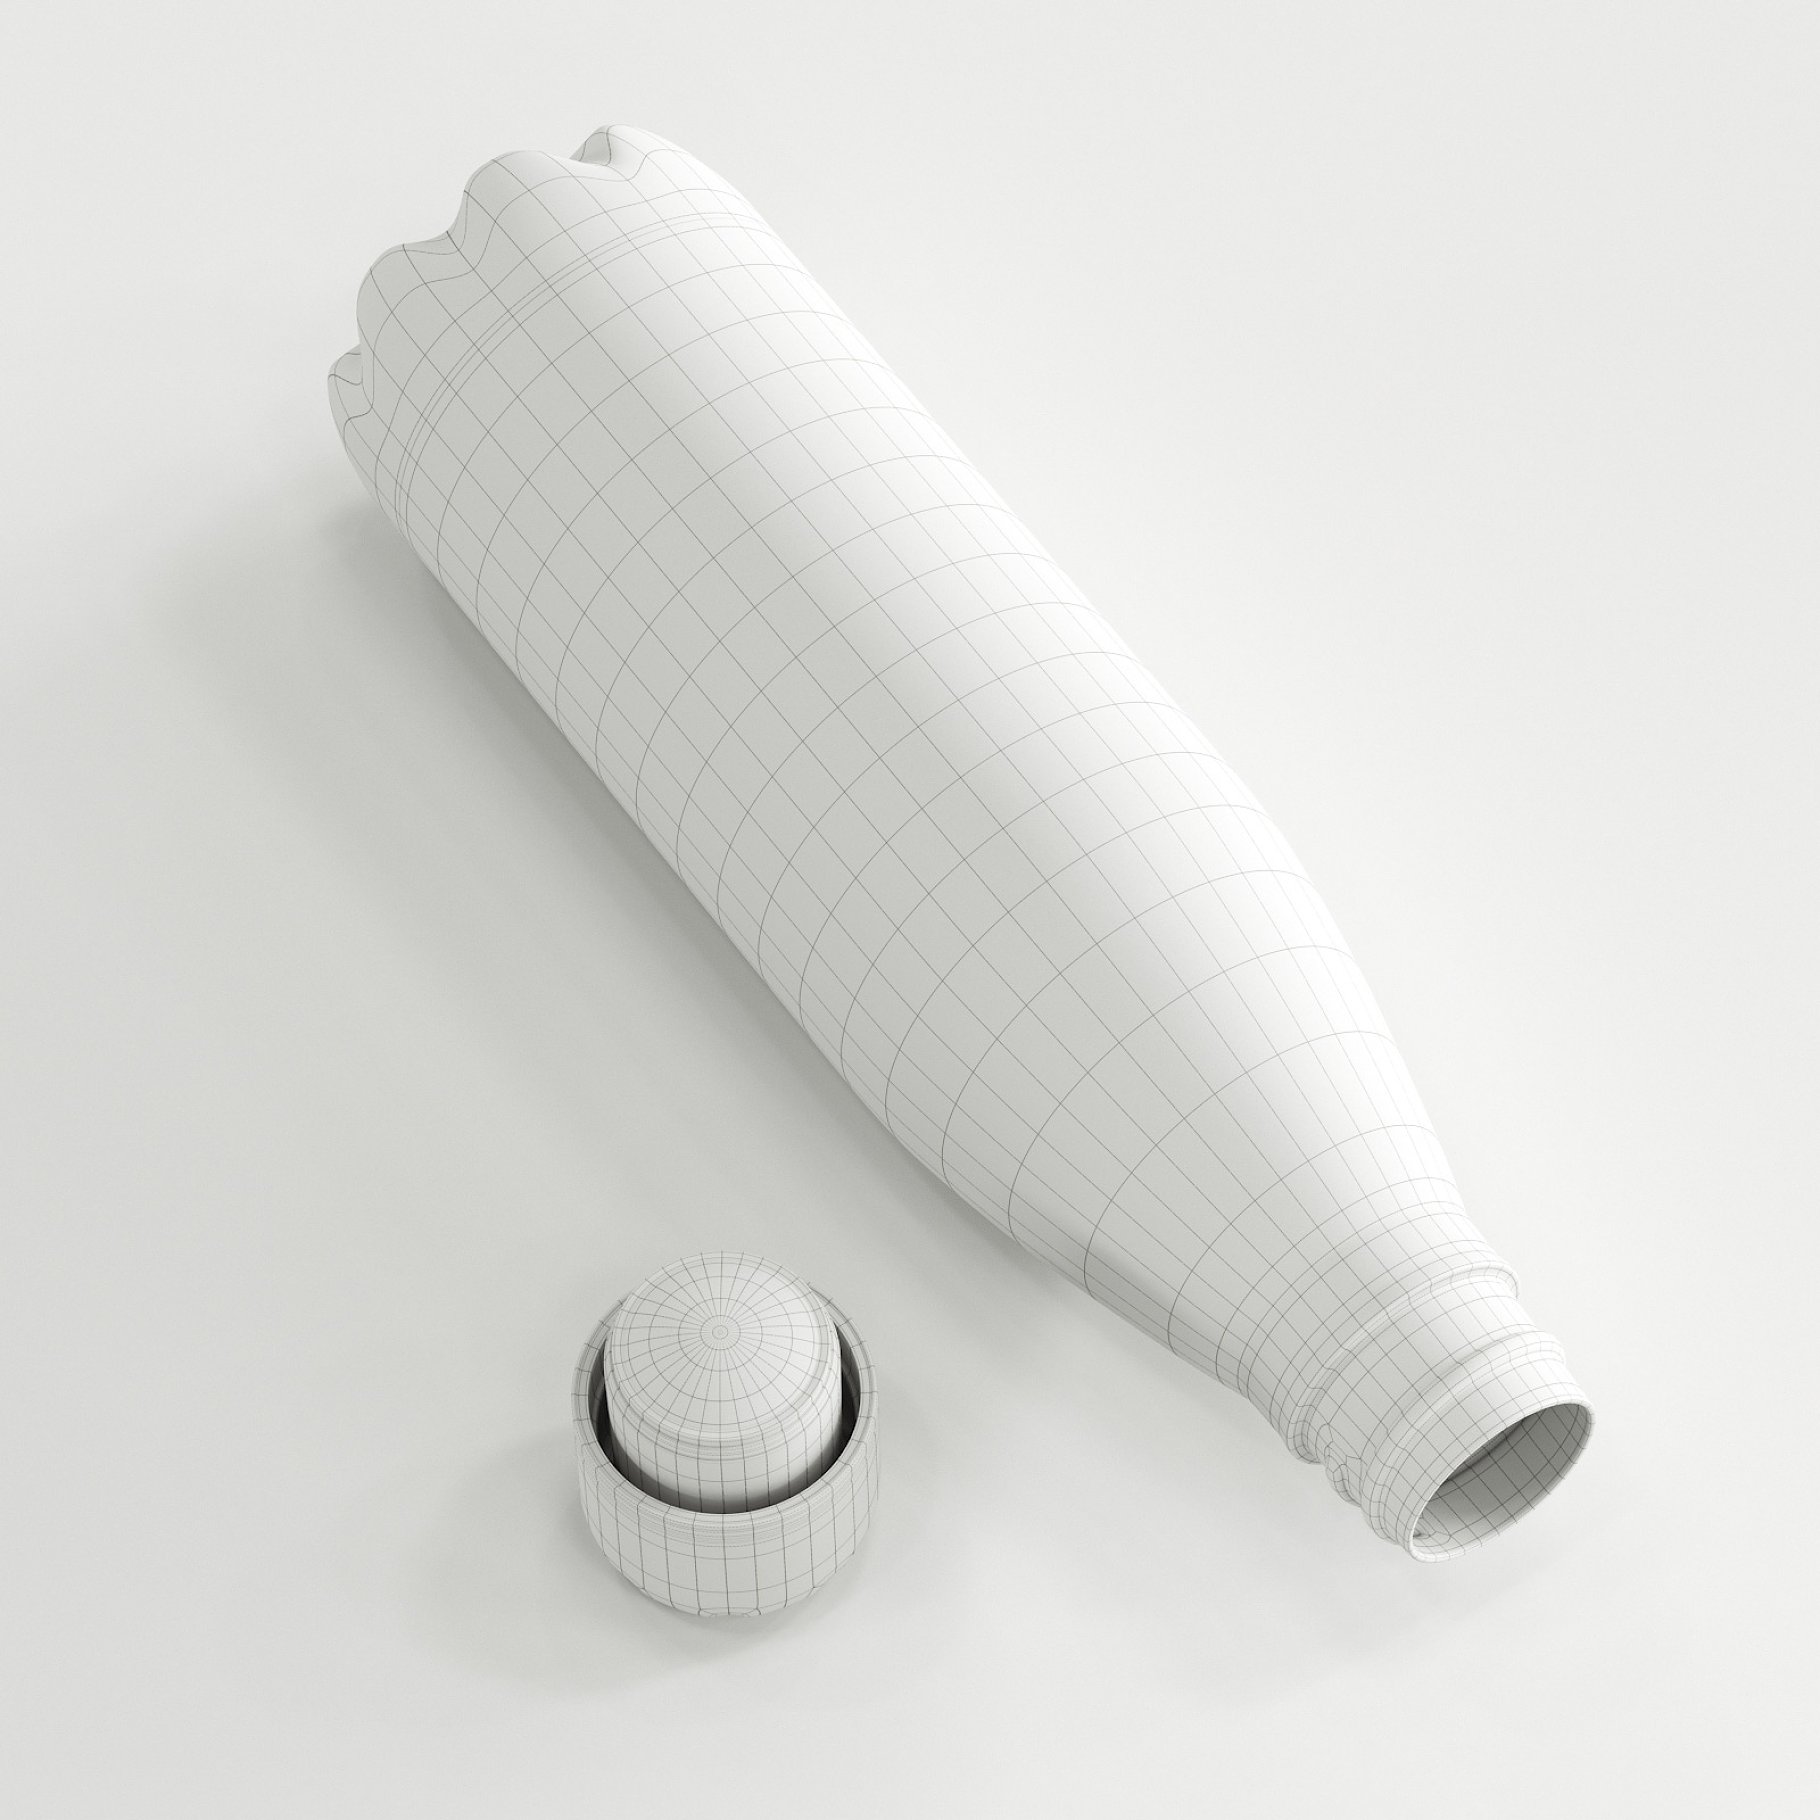 Images of an amazing 3d model of a lying bottle without texture